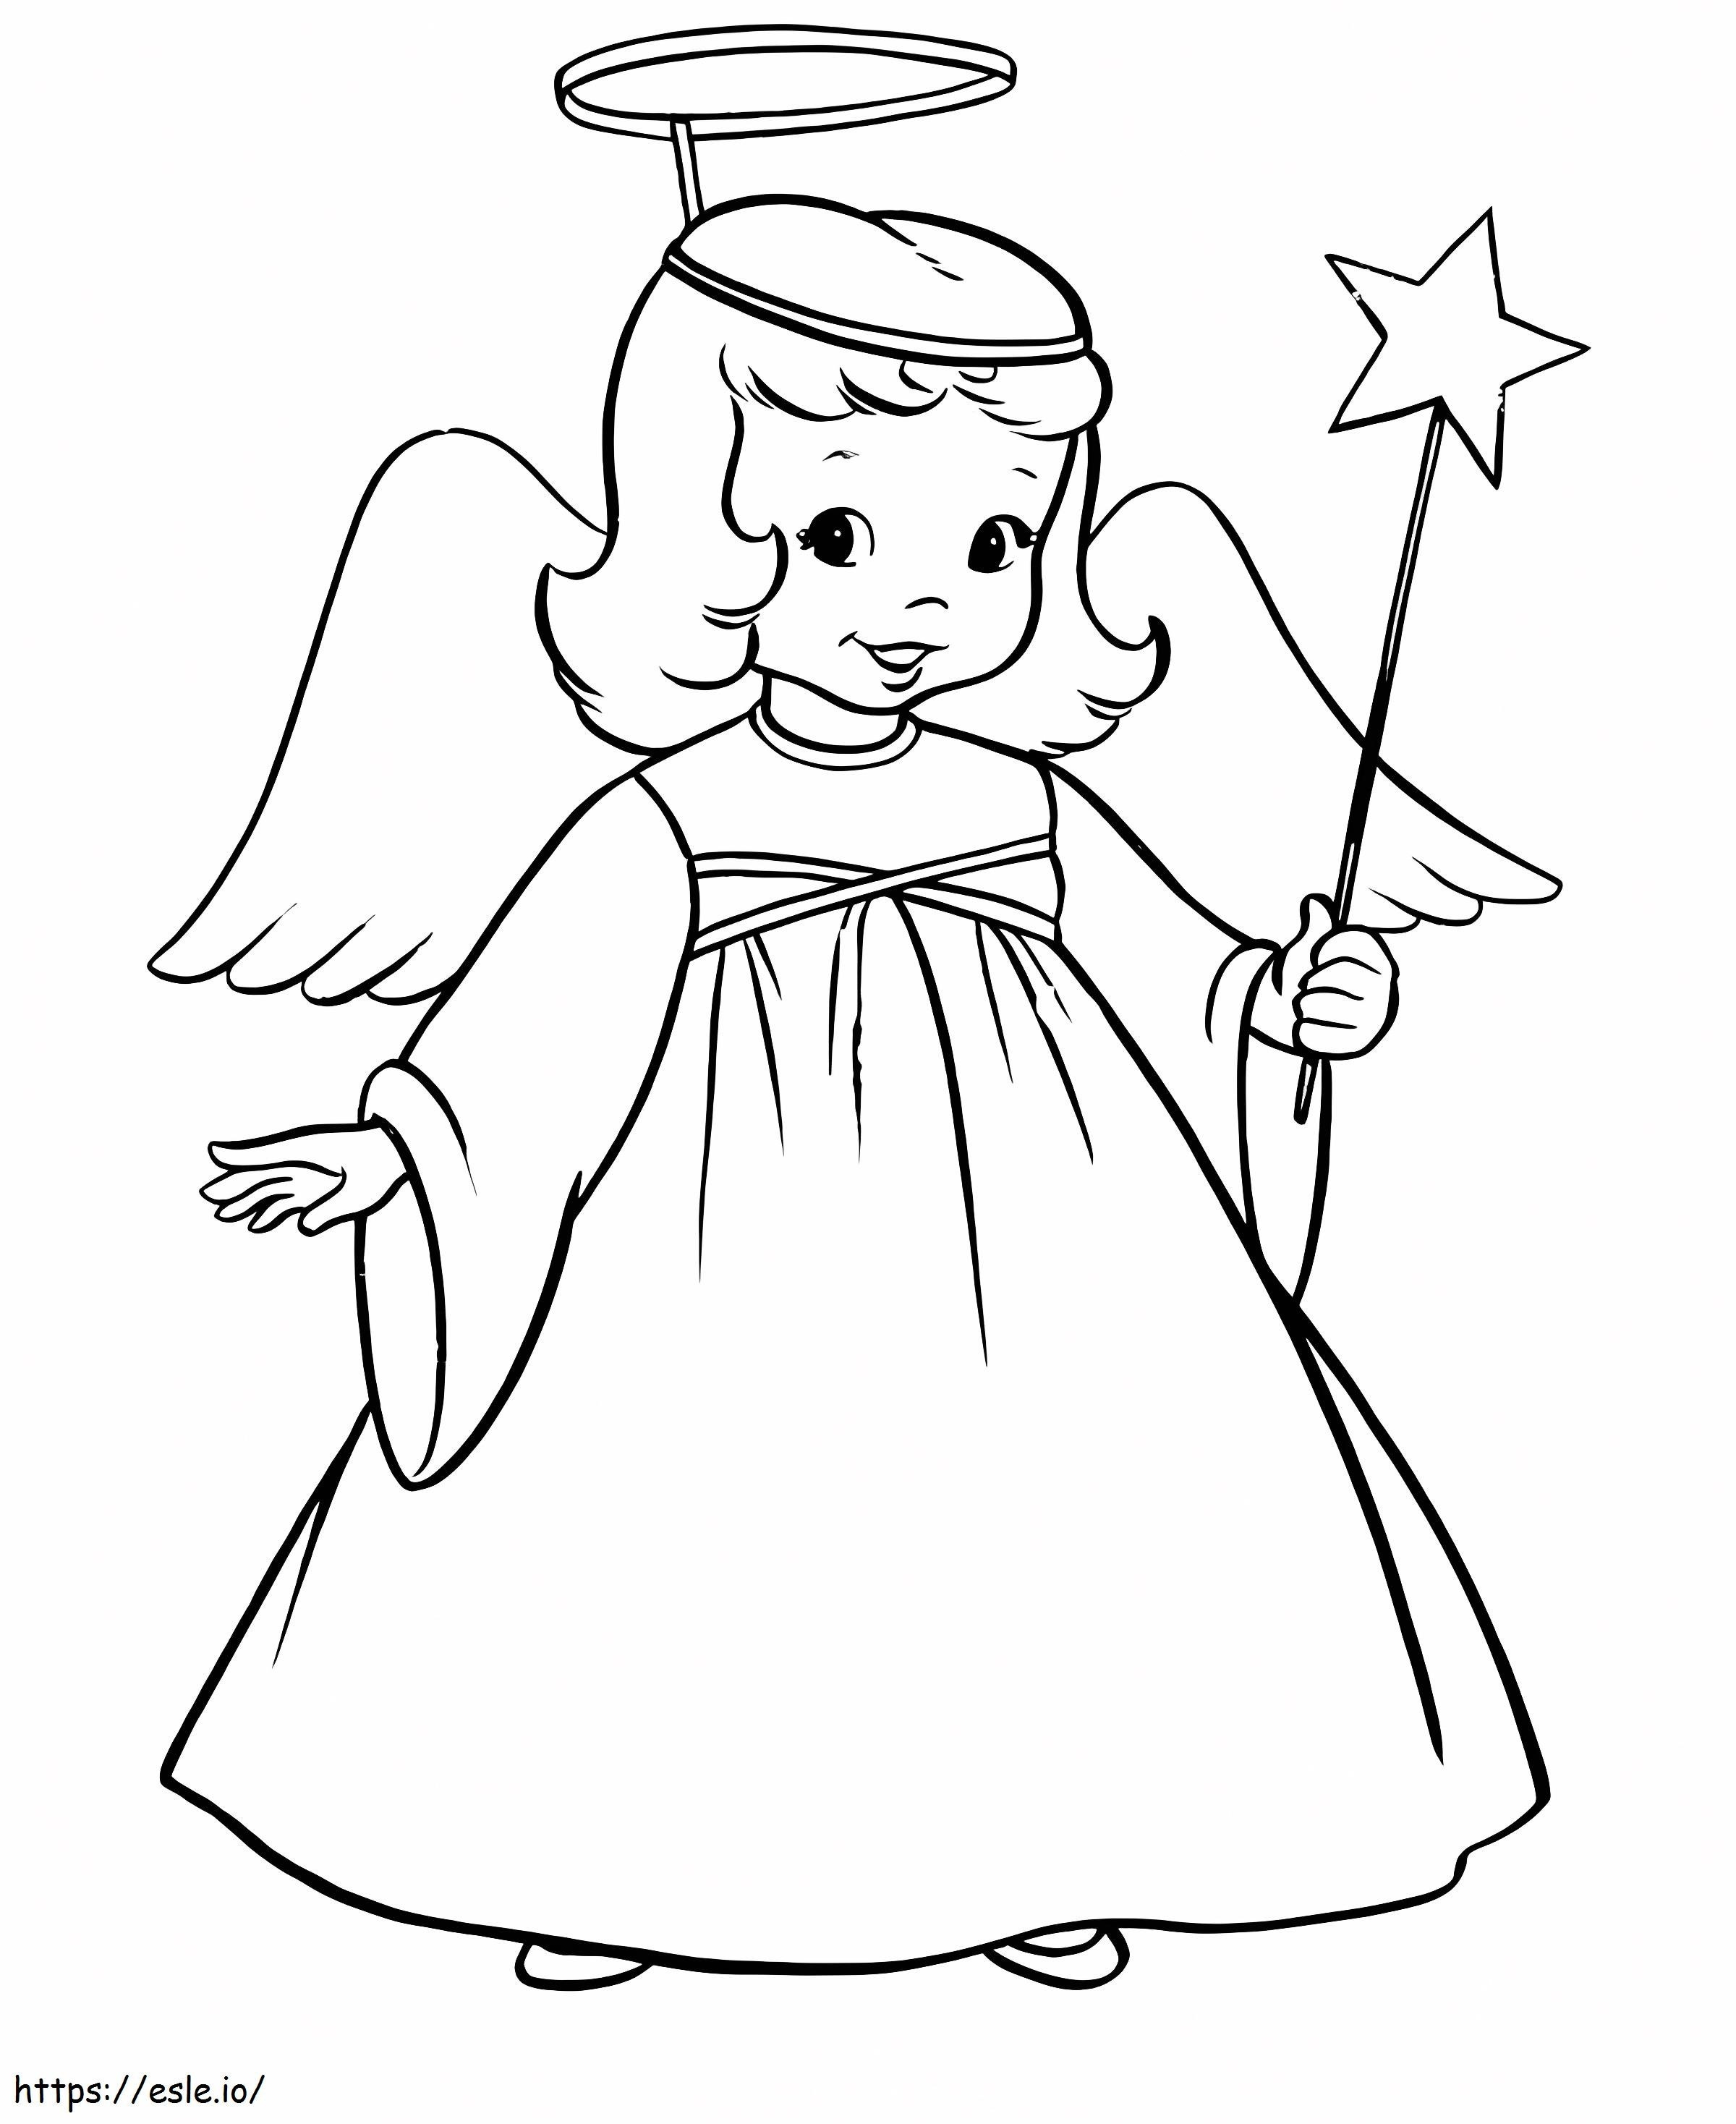 Wingled Angel With Magic Wand coloring page